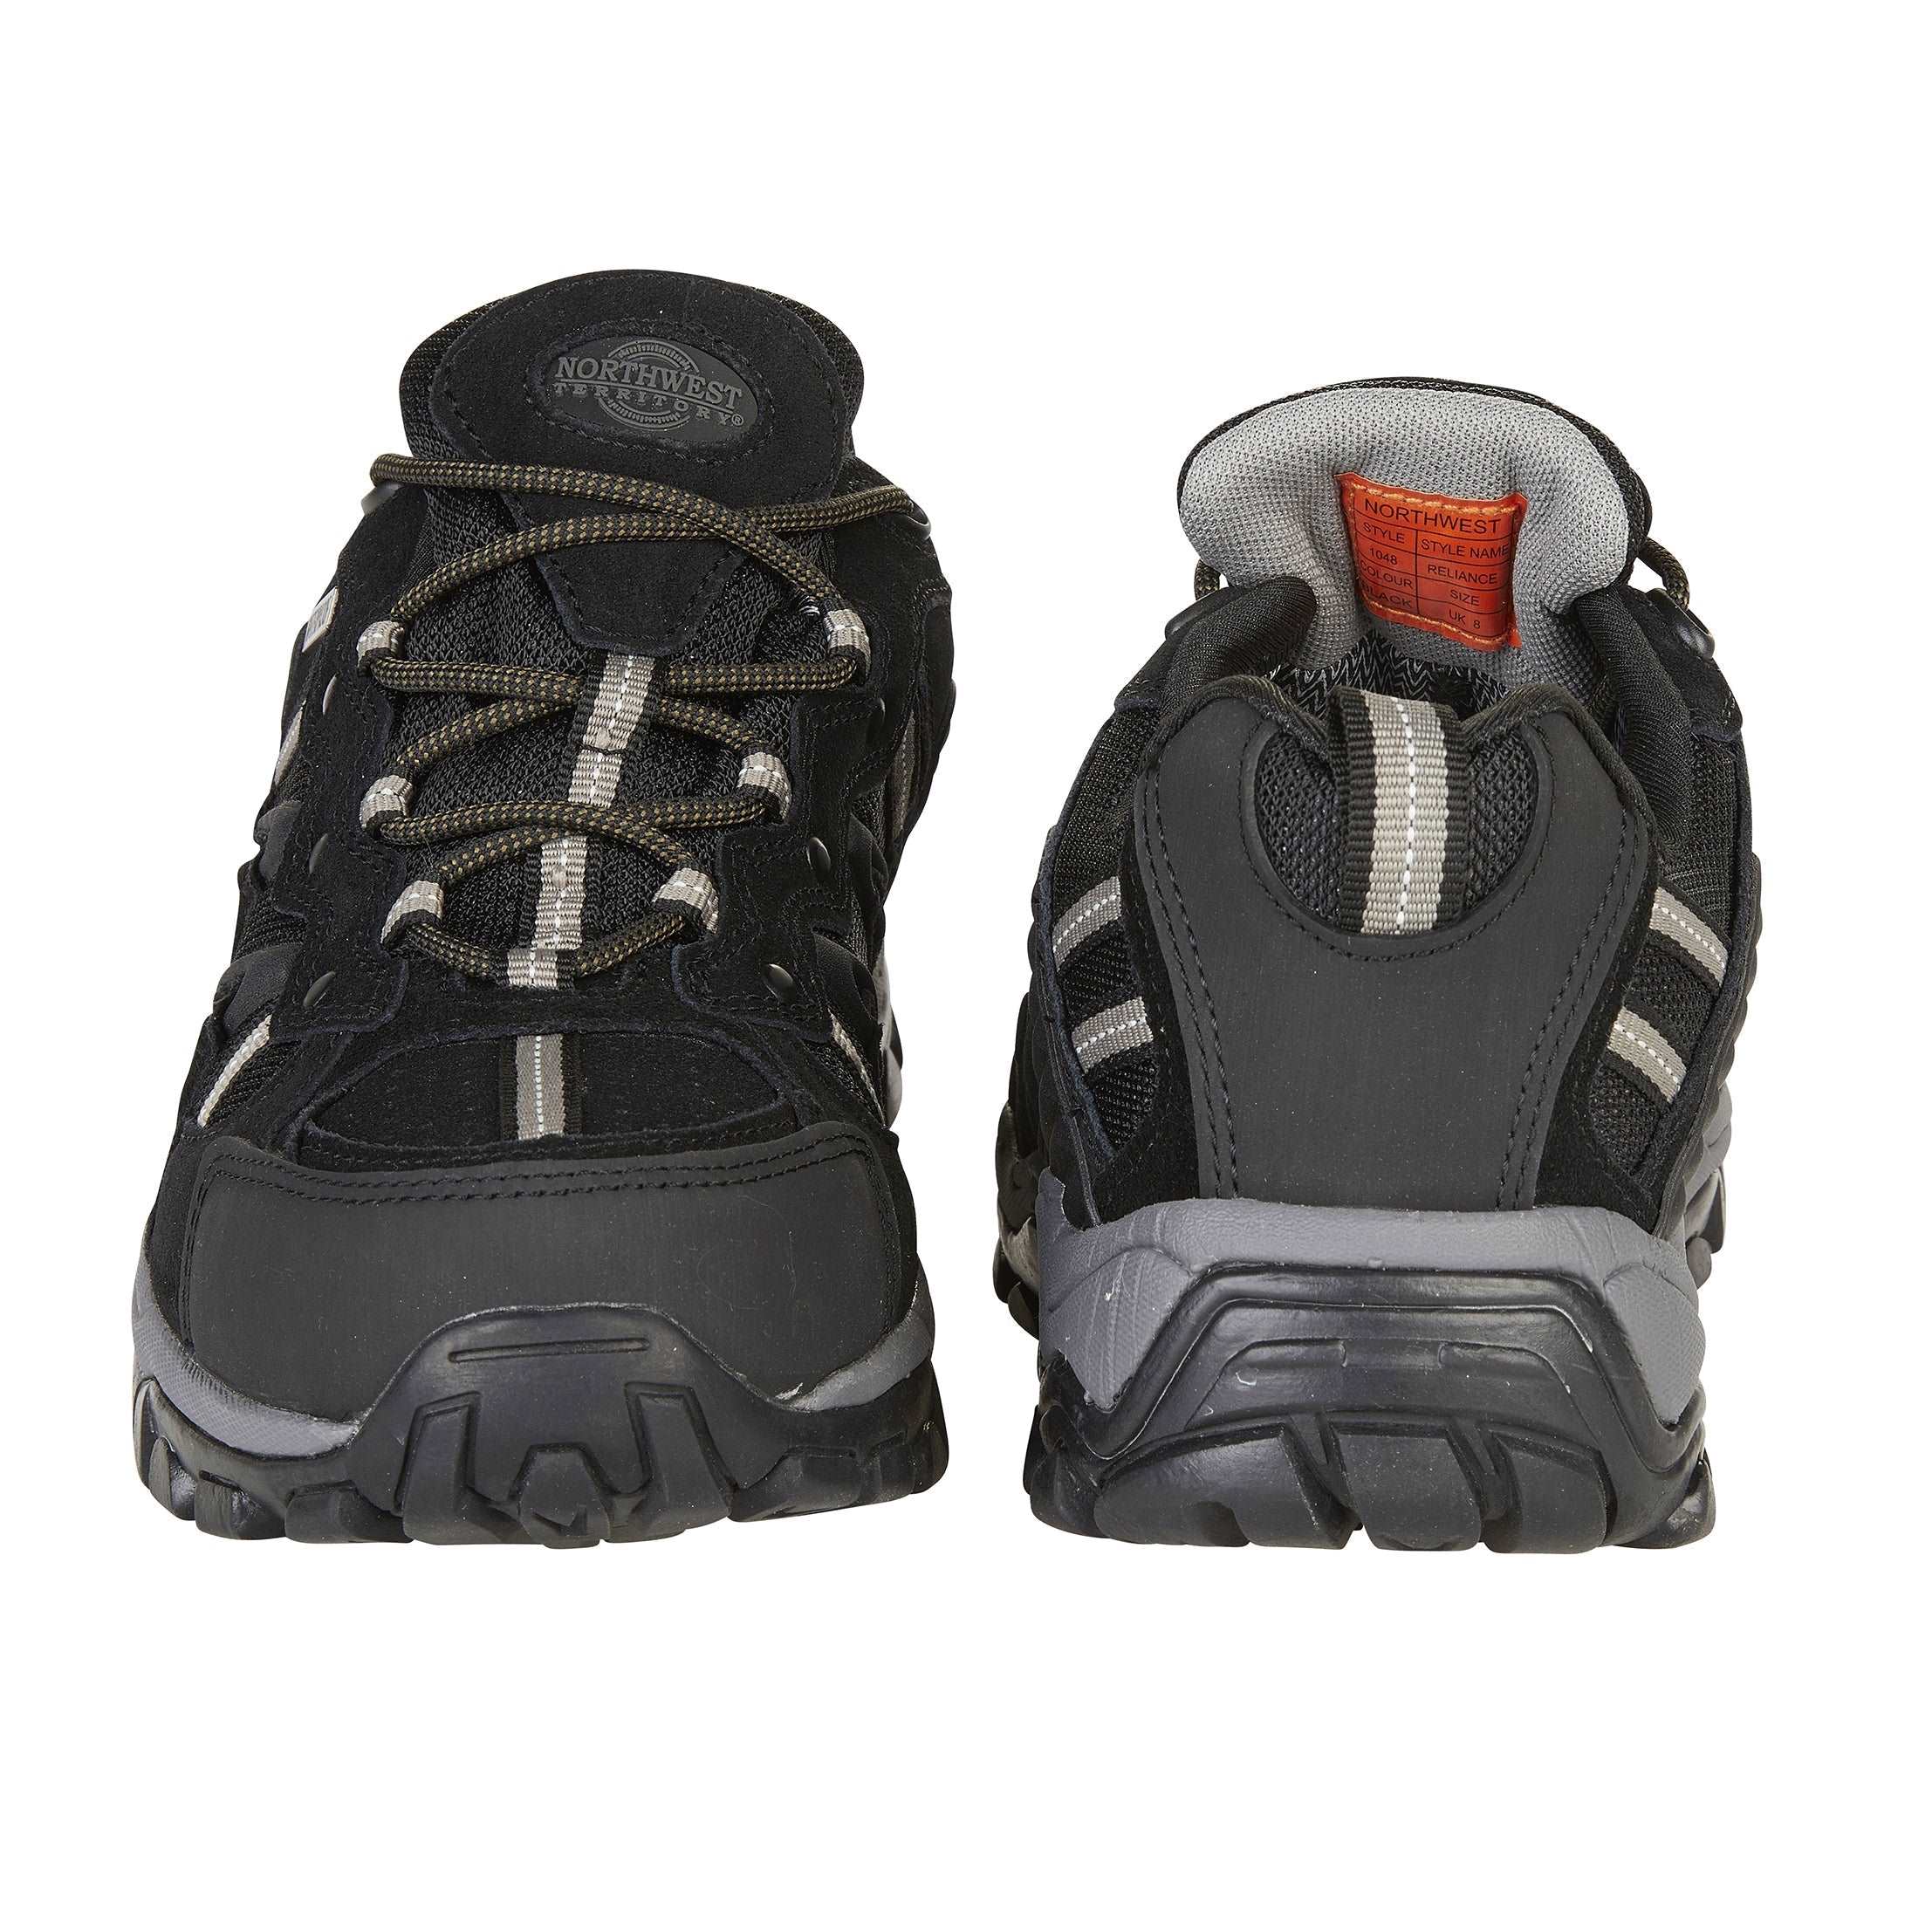 Reliance Waterproof Walking And Hiking Shoes